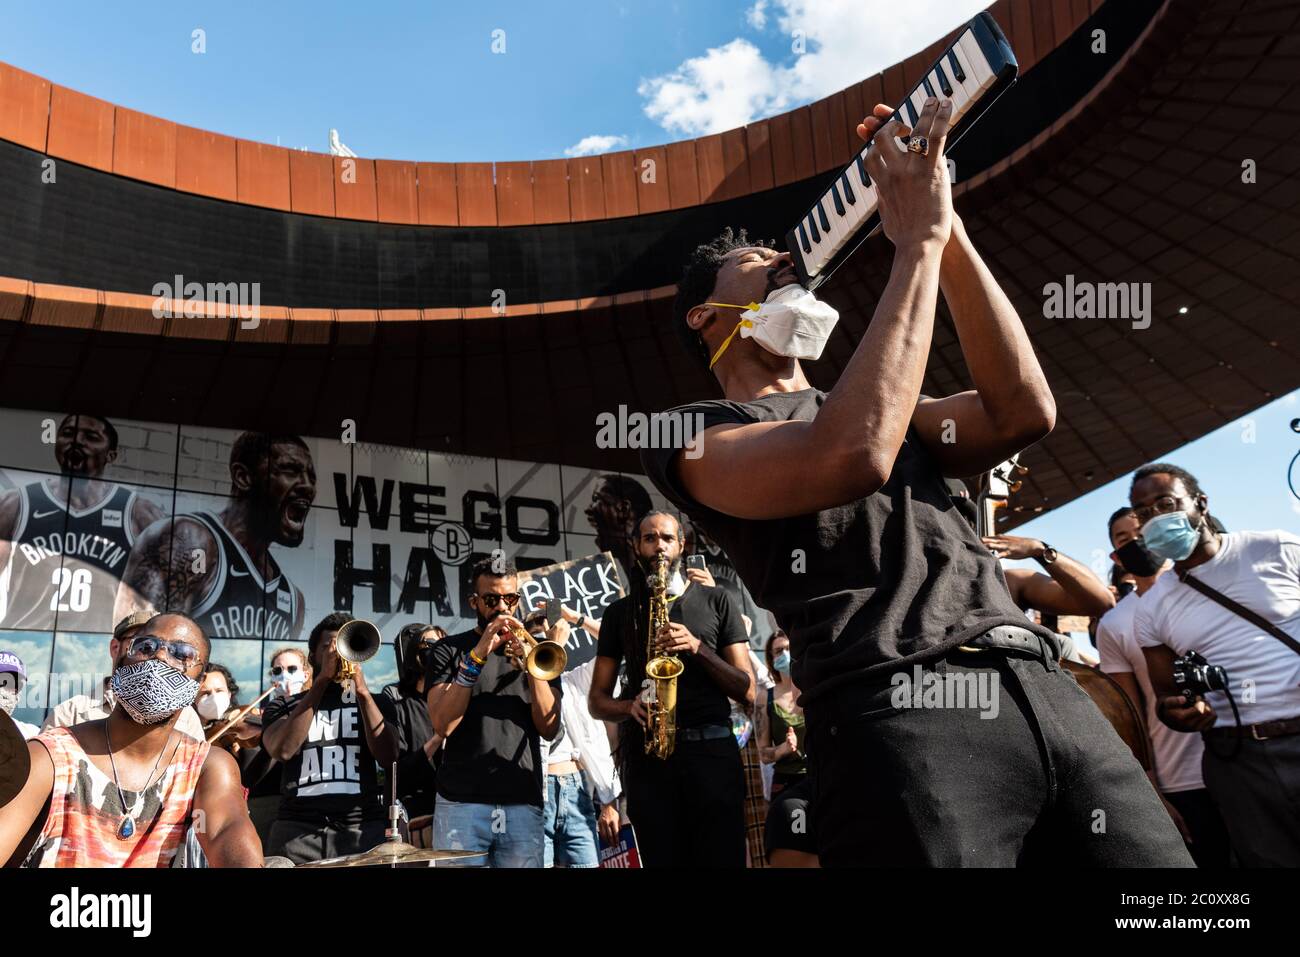 Brooklyn, United States Of America . 12th June, 2020. Entering the third week of protests after the death of George Floyd, Jon Batiste and his band 'Stay Human' play at the Barclays Center calling for racial justice on June 12, 2020, in Brooklyn, New York. (Photo by Gabriele Holtermann/Sipa) Credit: Sipa USA/Alamy Live News Stock Photo